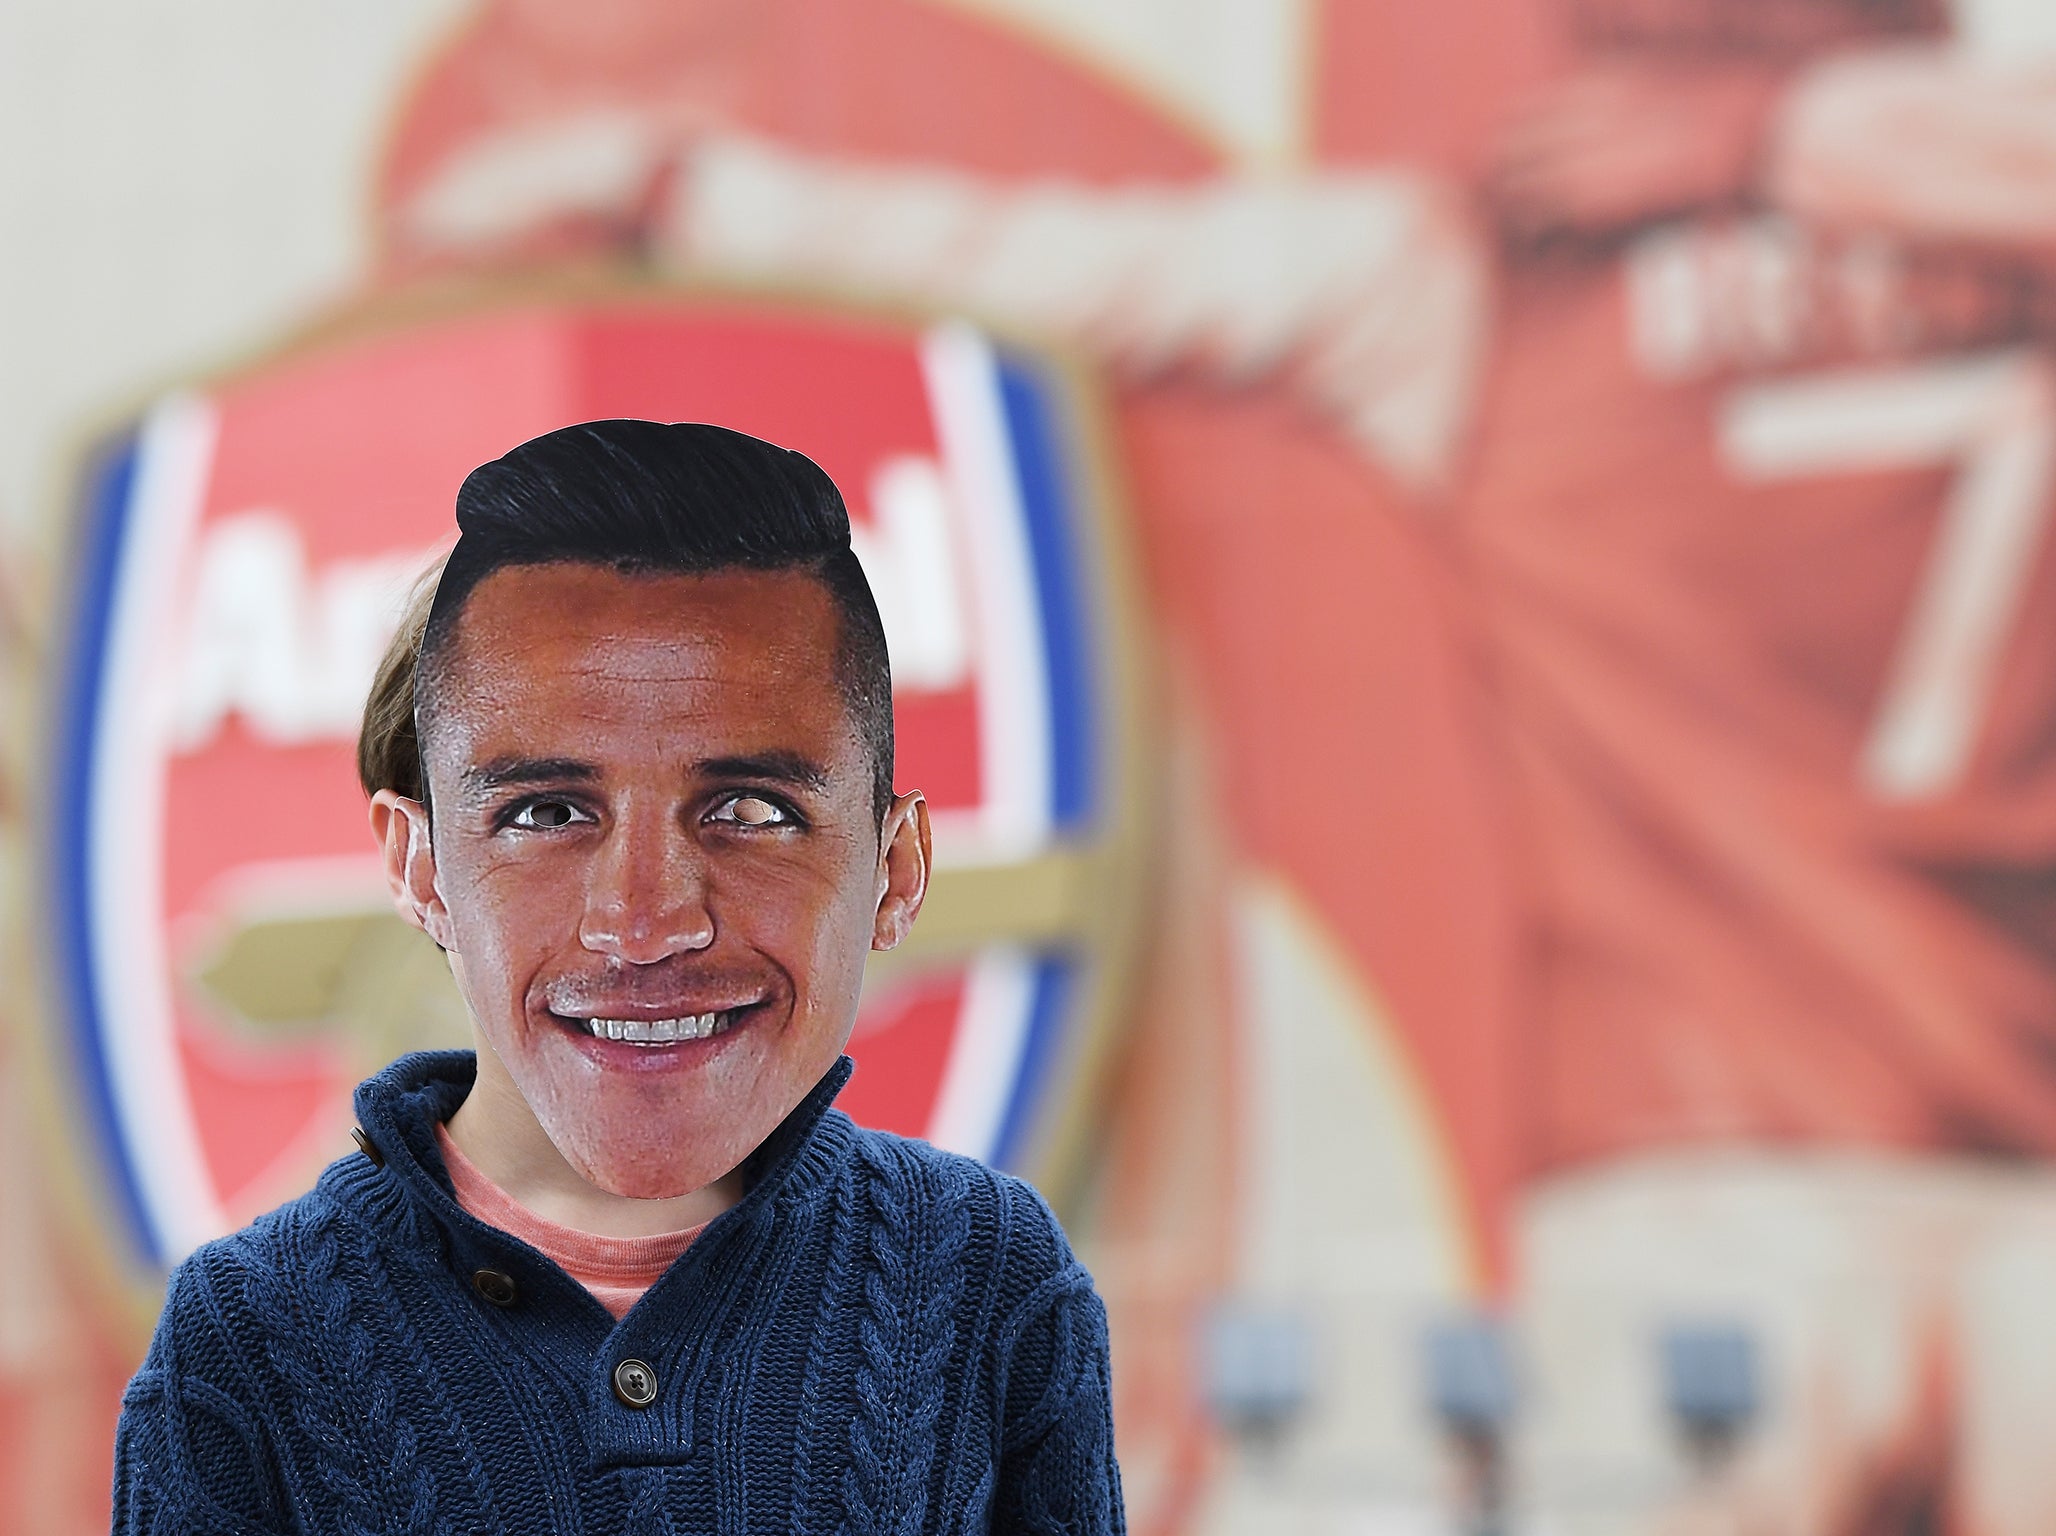 Arsenal fans are desperate for Alexis to stay